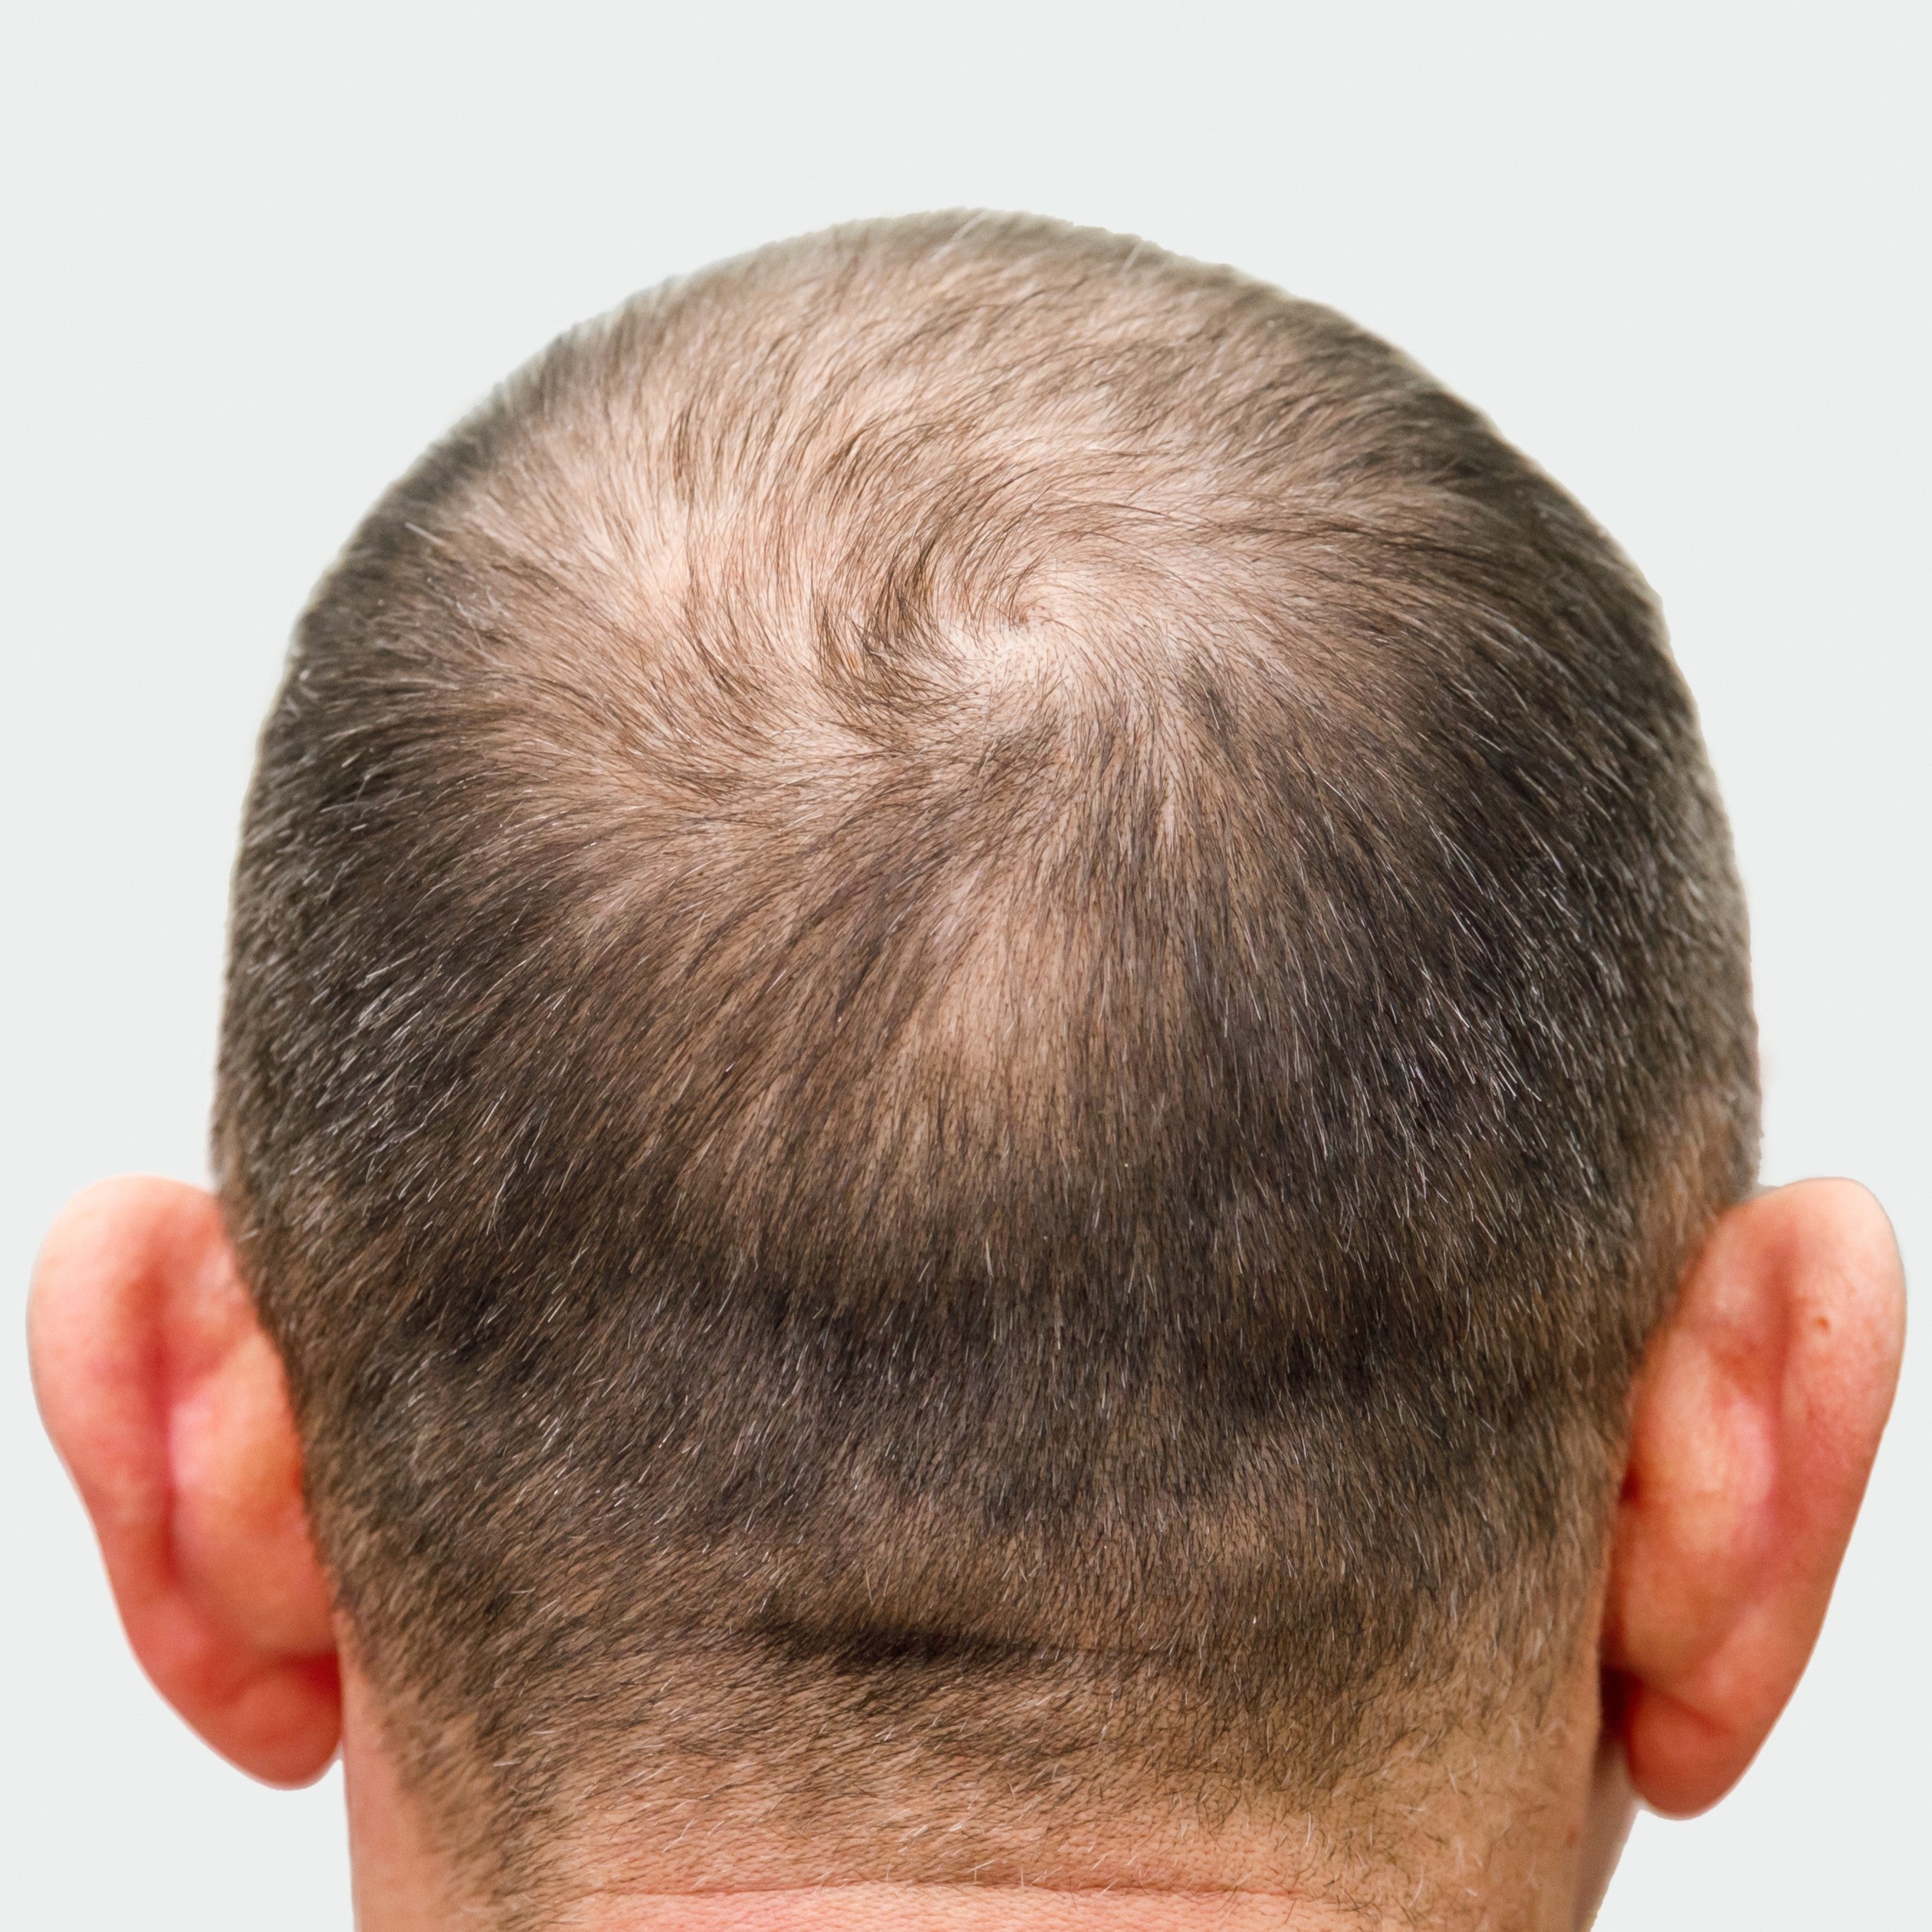 8 Hairstyles to Try When Balding | NaturallyCurly.com